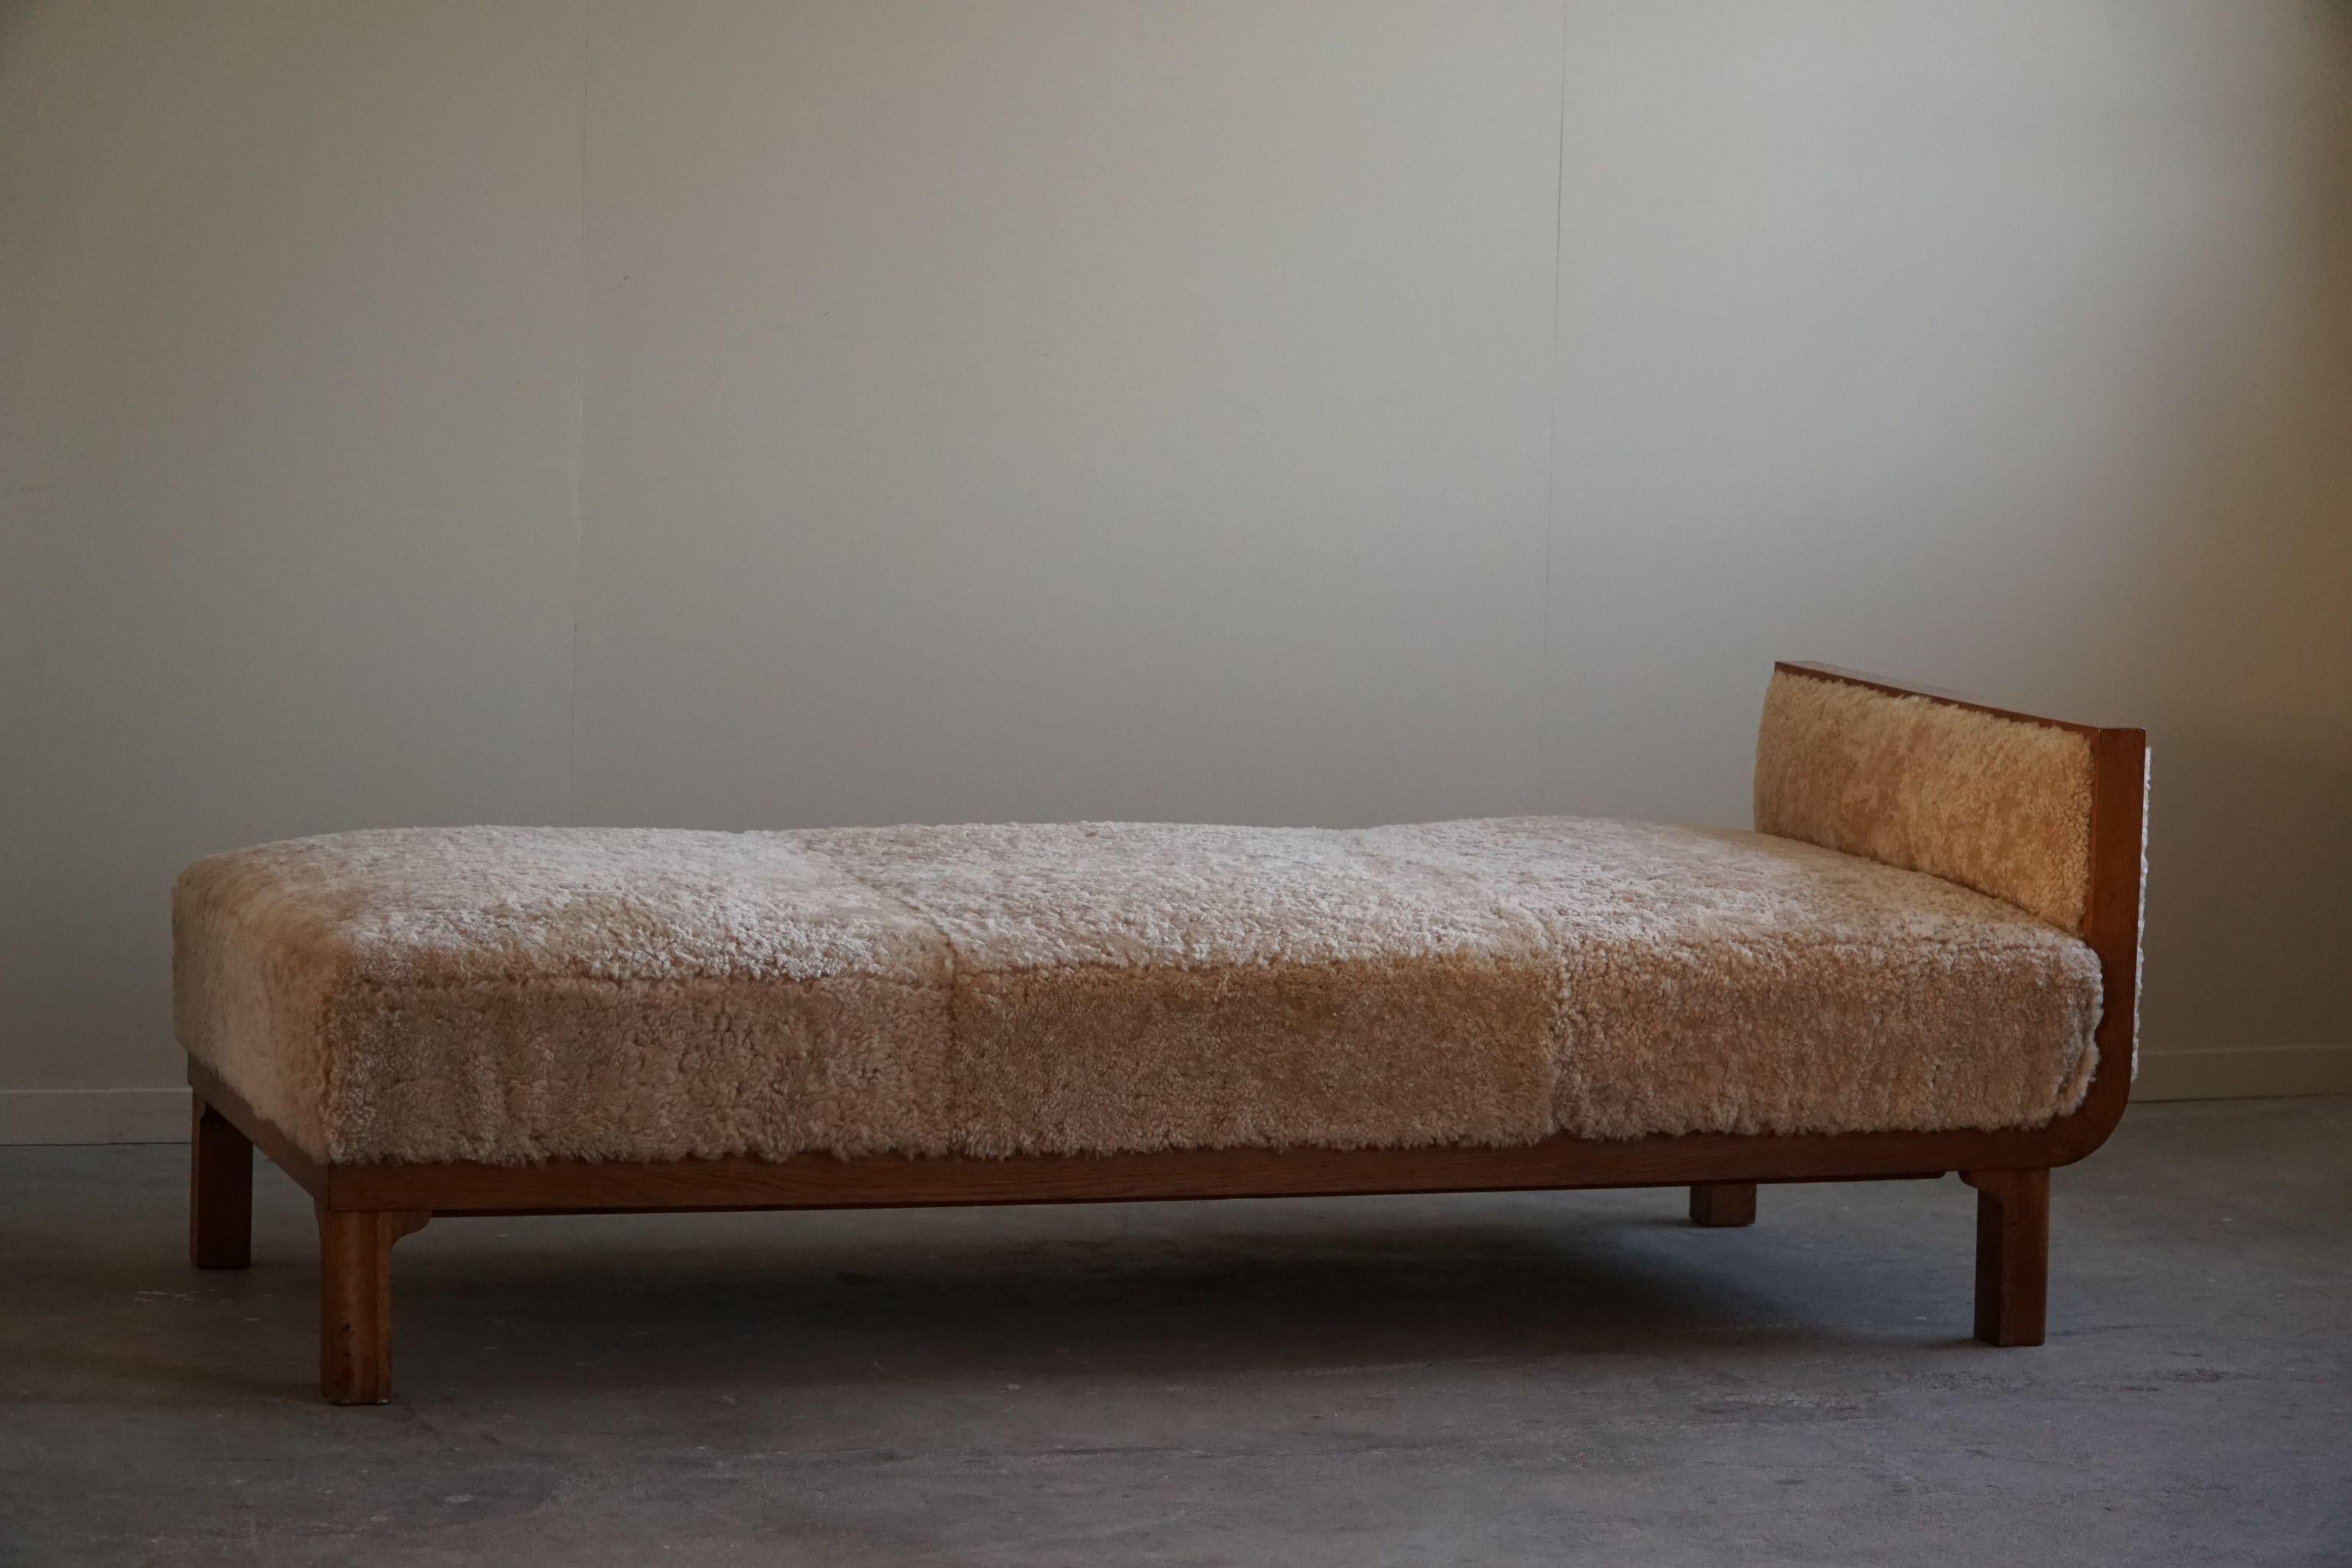 Art Deco Oak Daybed Reupholstered in Lambswool, By a Danish Cabinetmaker, 1940s For Sale 12